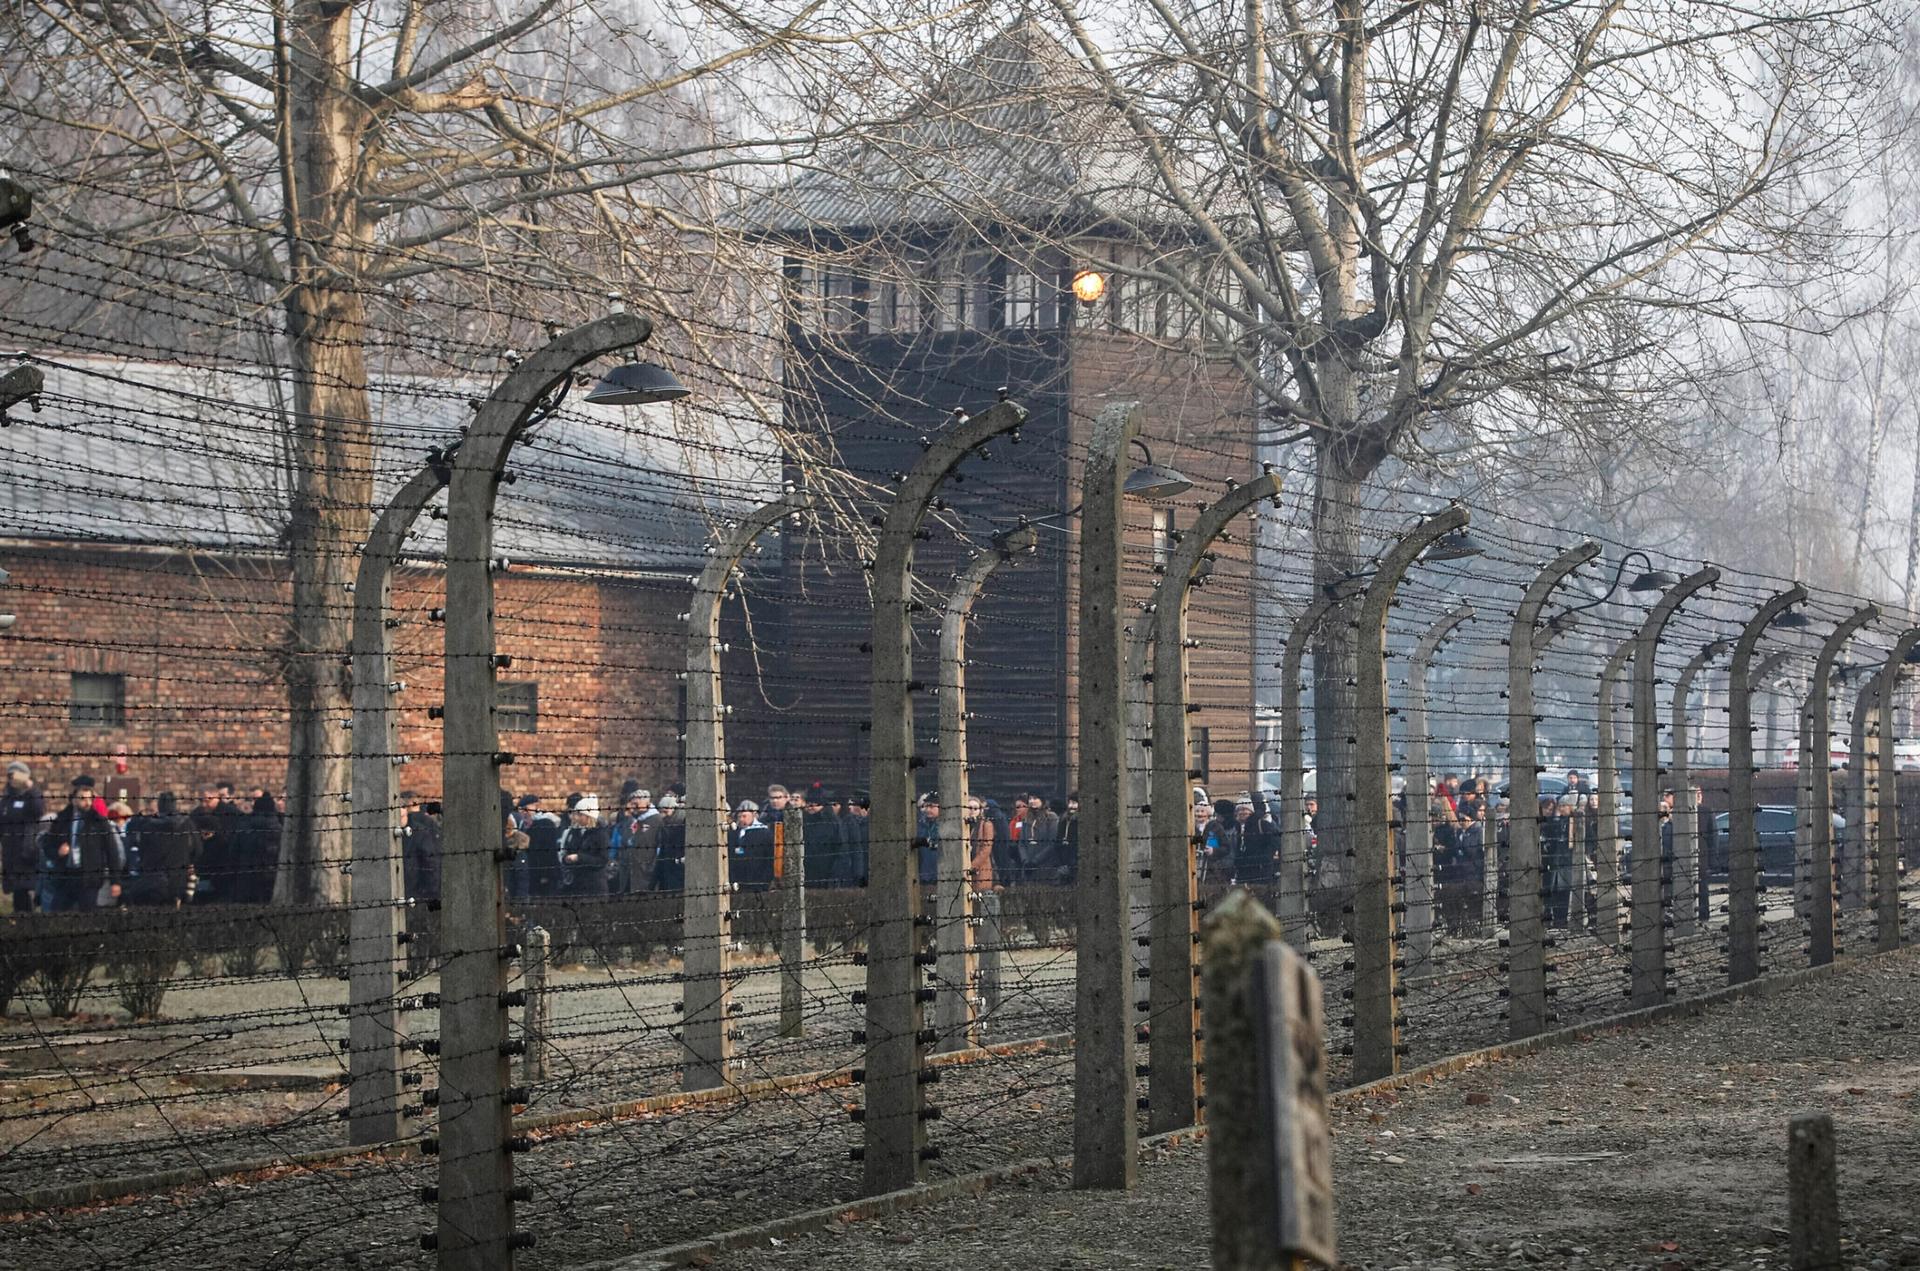 People are seen arriving at the site of the Auschwitz-Birkenau Nazi German death camp, where more than 1.1 million were murdered, in Oswiecim, Poland, Jan. 27, 2020. 